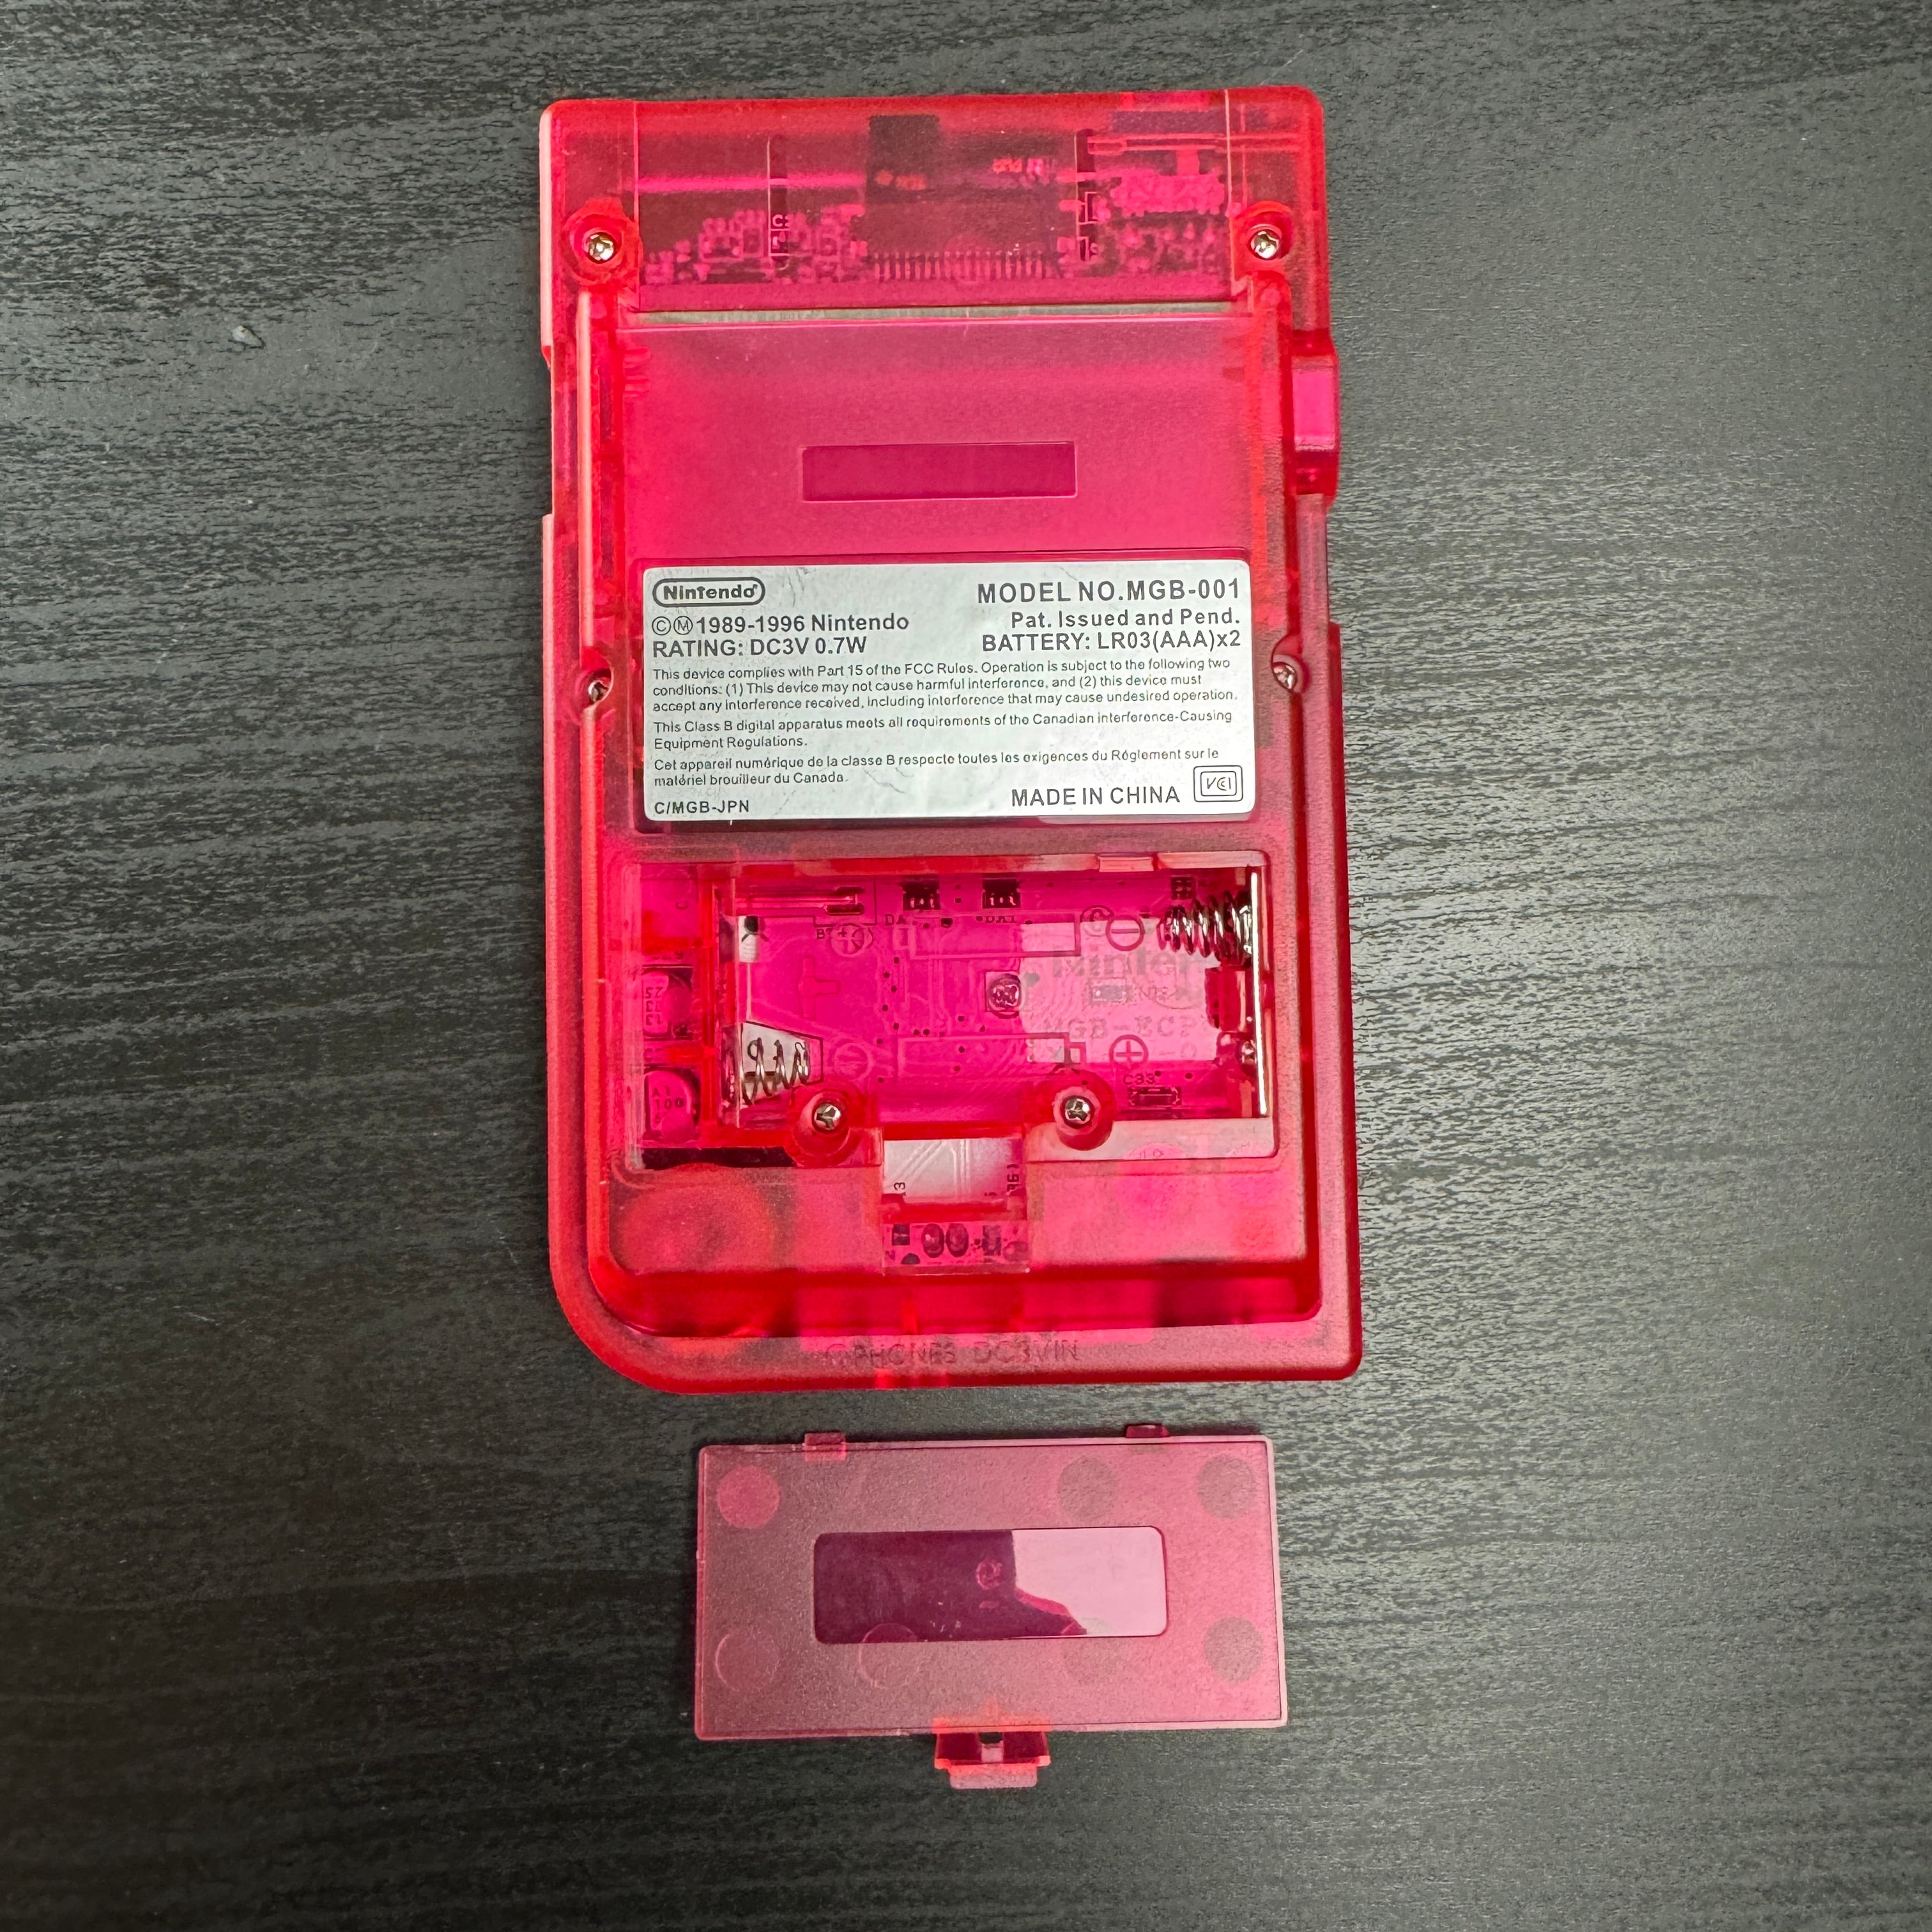 Modded GameBoy Pocket w/ IPS Display (Clear Red/Pink)